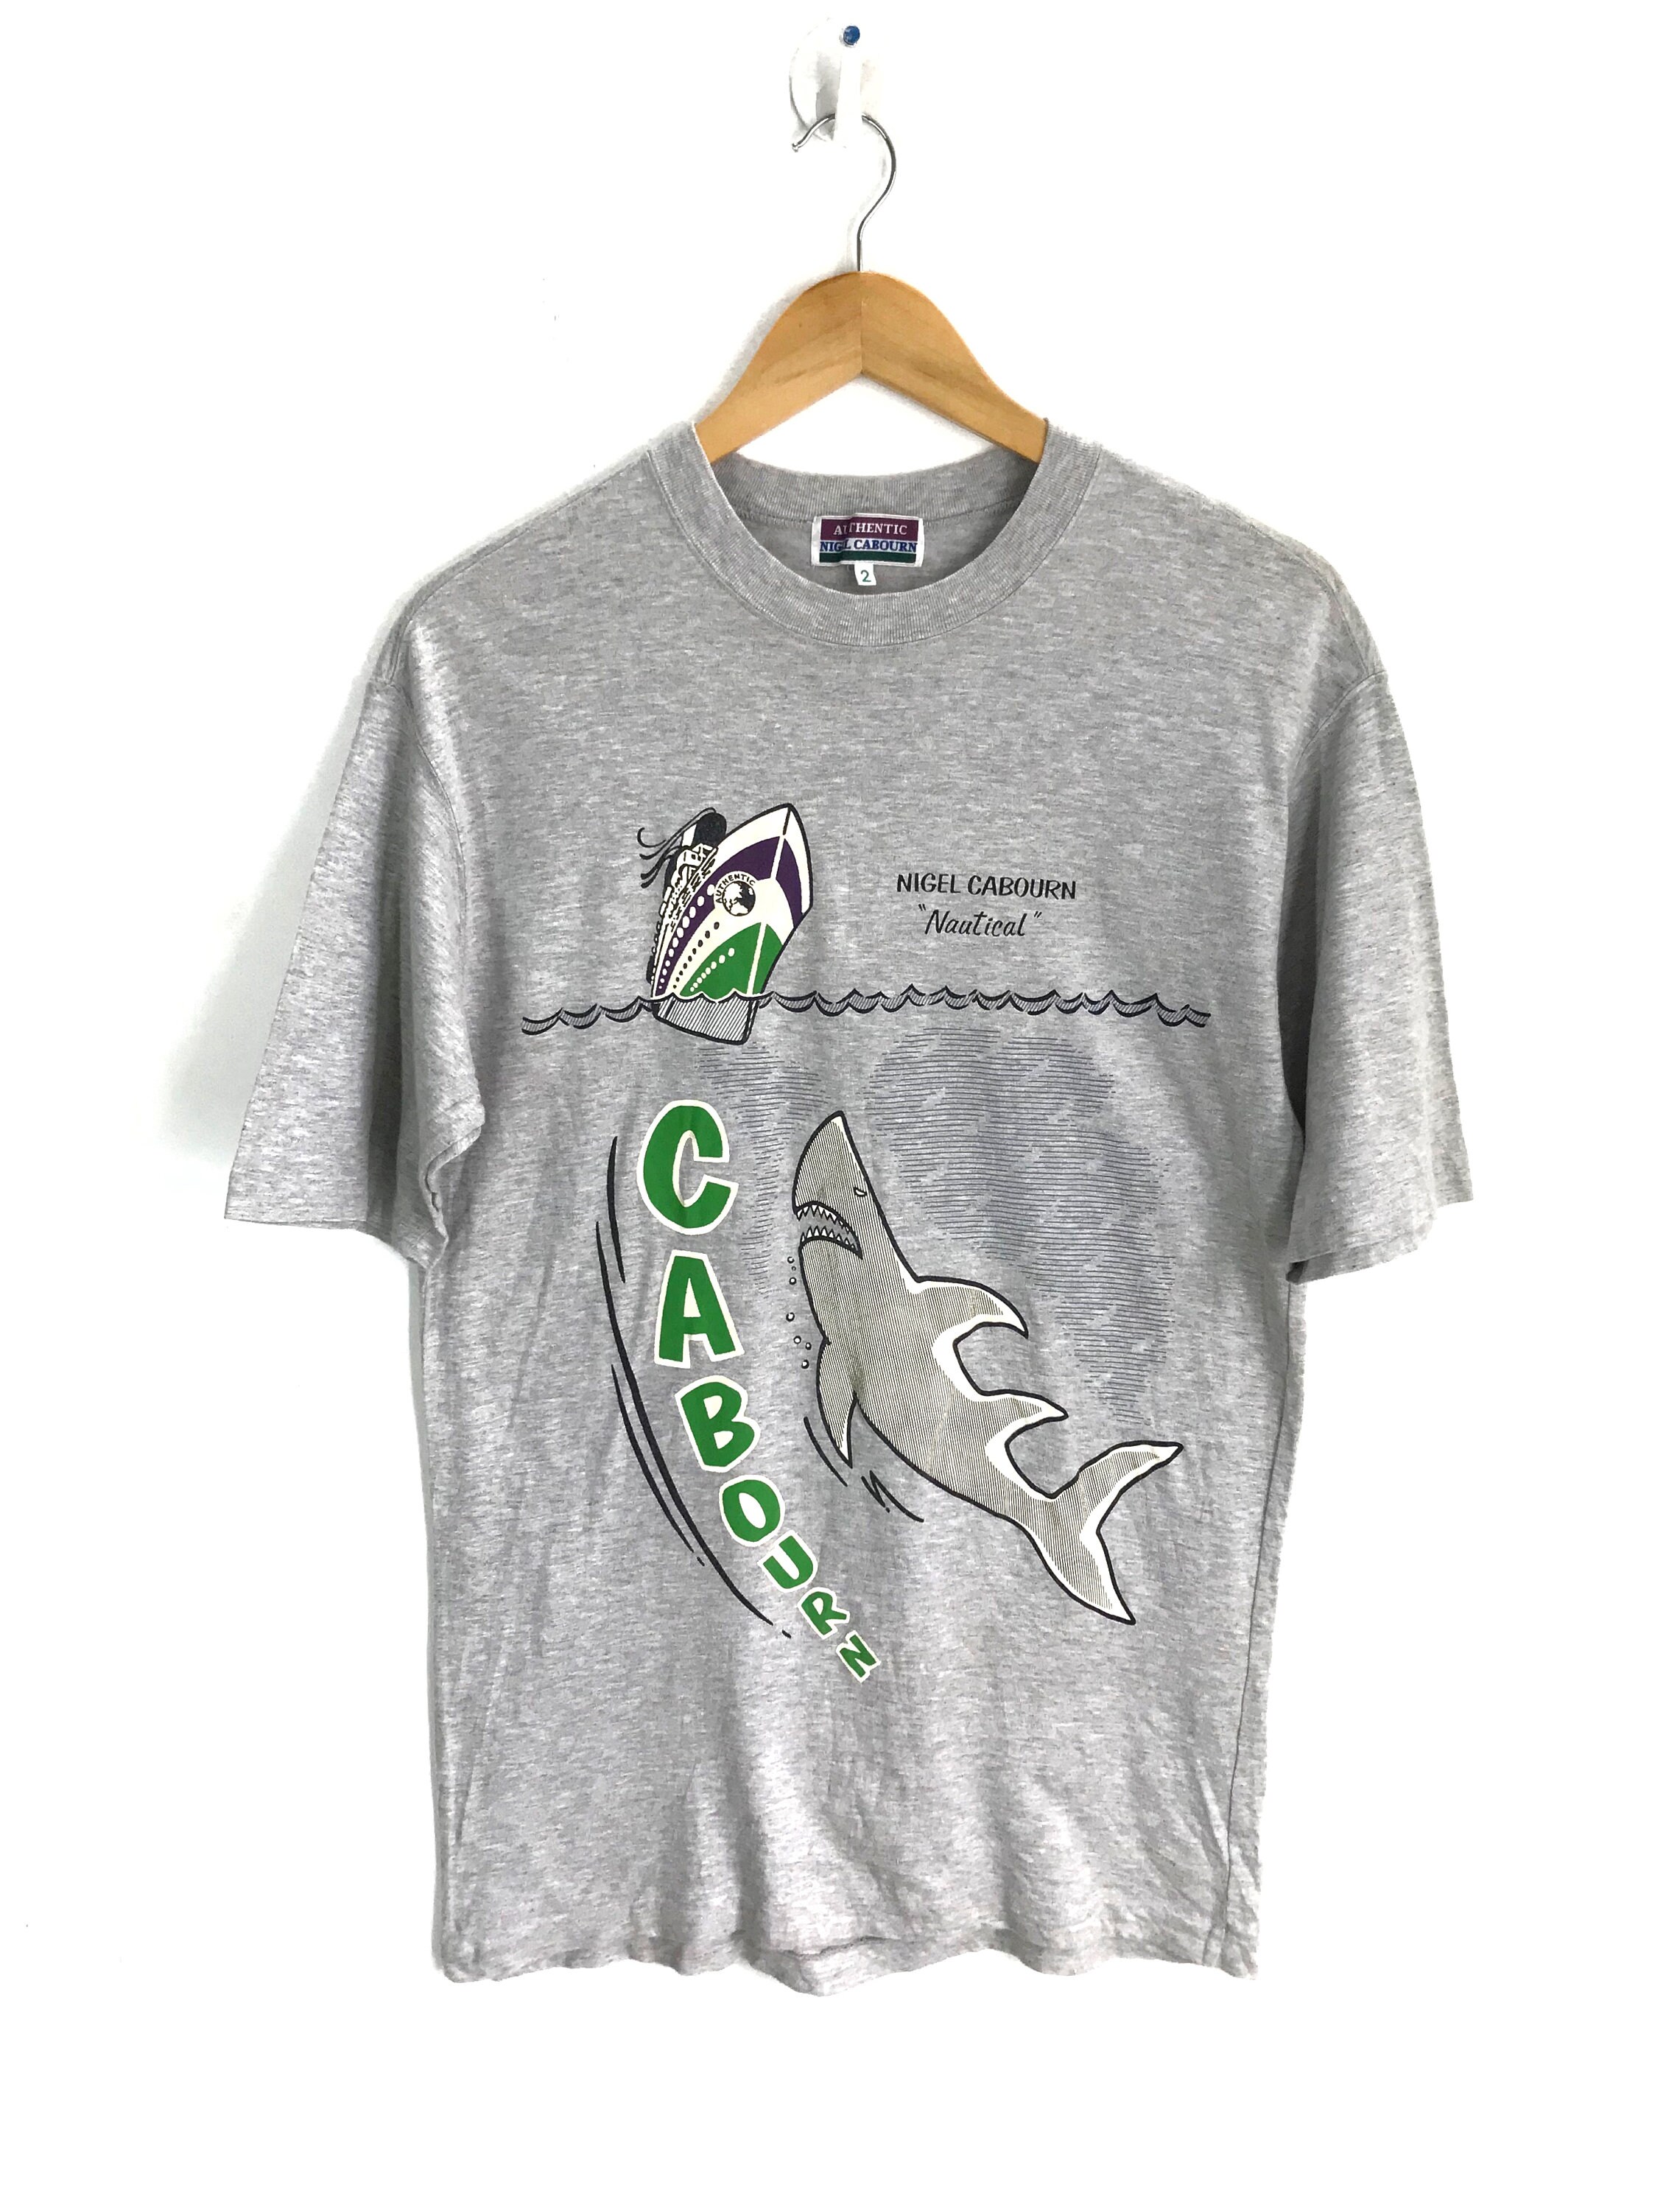 Yamamoto Fishing Lover Products Cool Gift Worn Look T Shirt